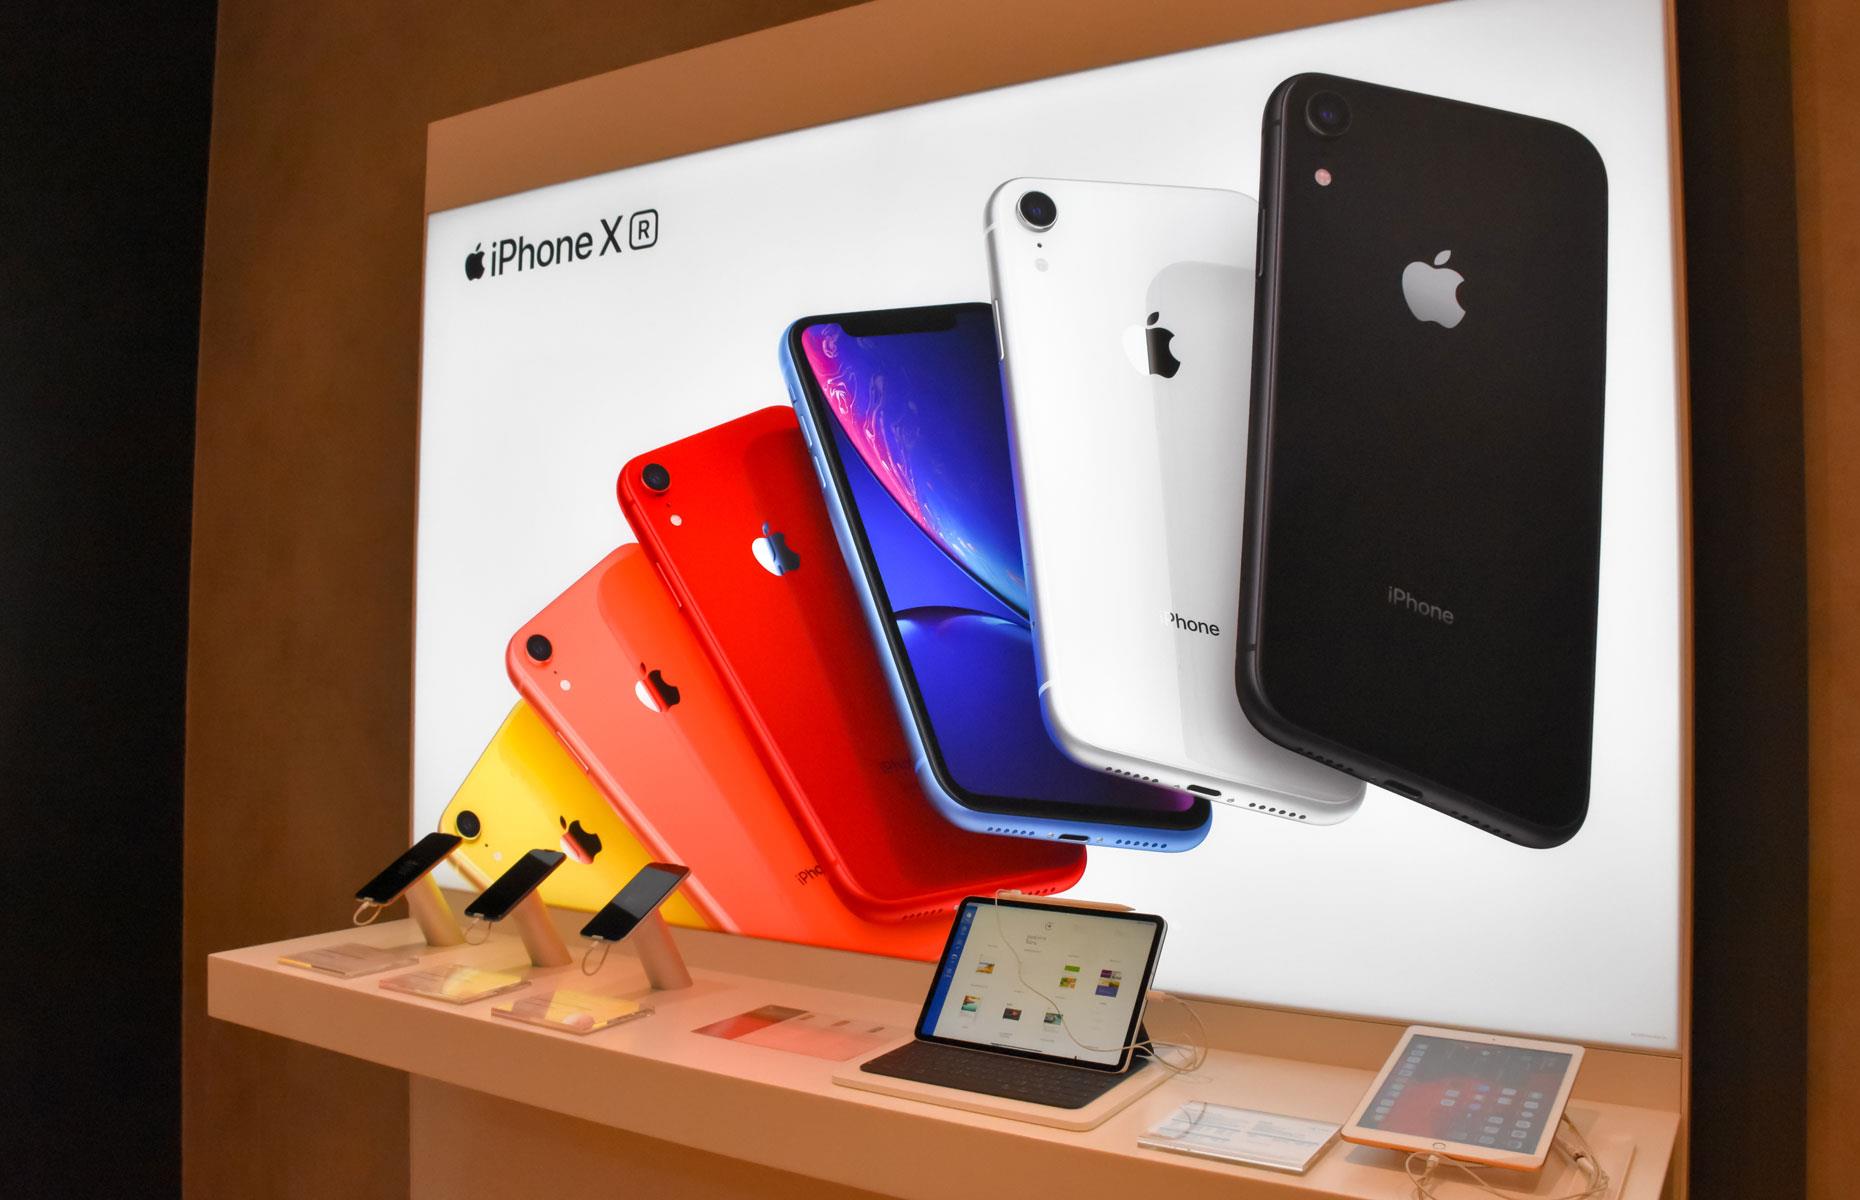 The Apple products worth $105,000 (£81.5k)